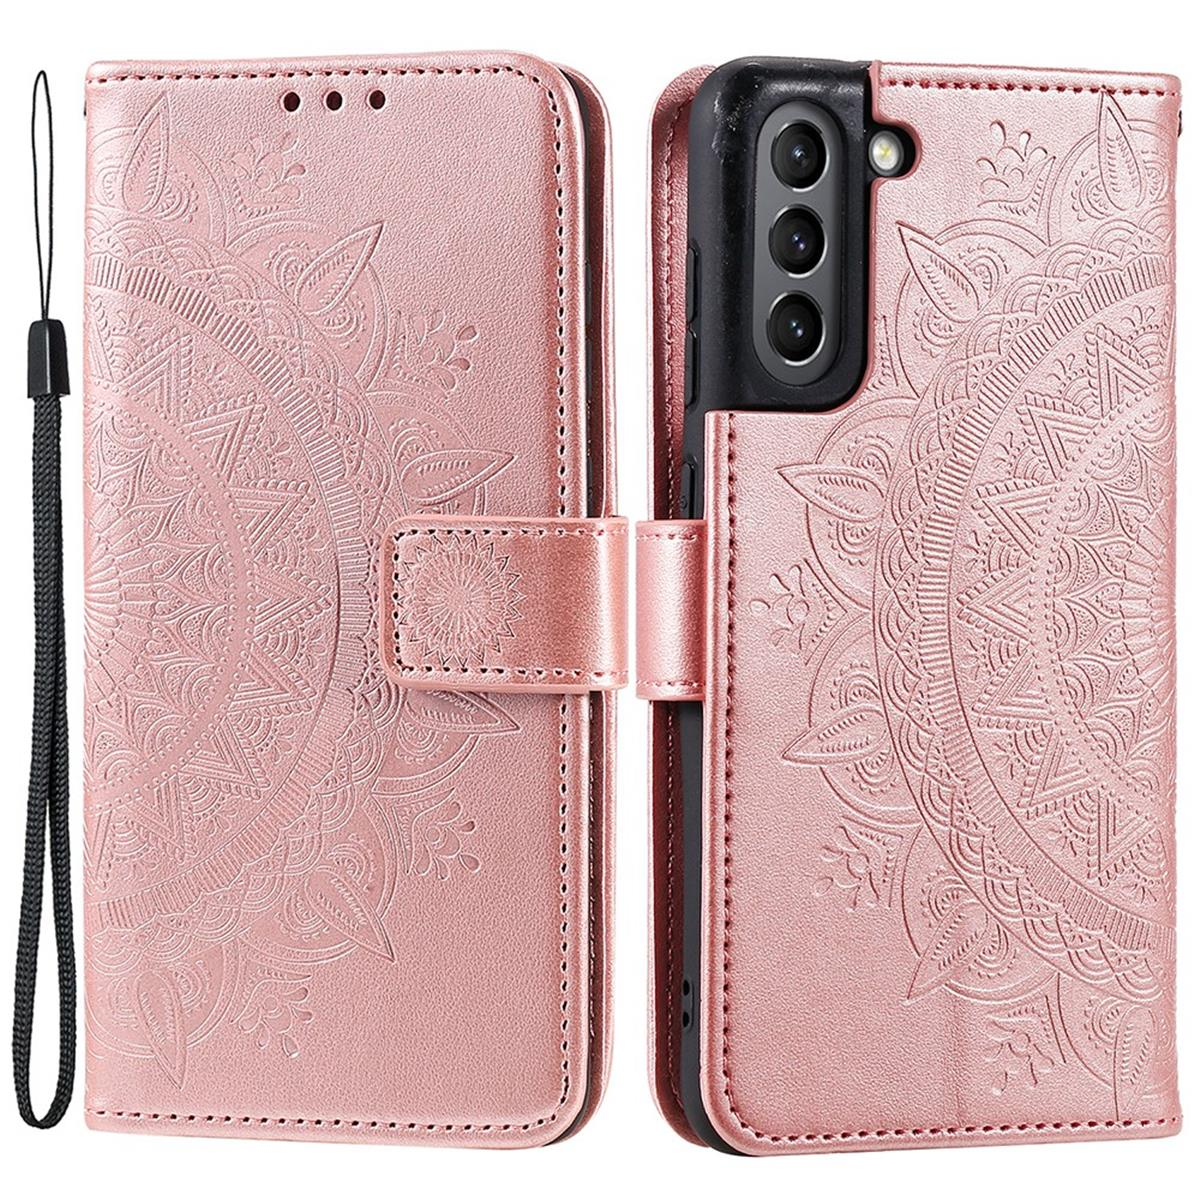 Mandala Muster, Samsung, FE, S21 mit Roségold Galaxy Bookcover, COVERKINGZ Klapphülle